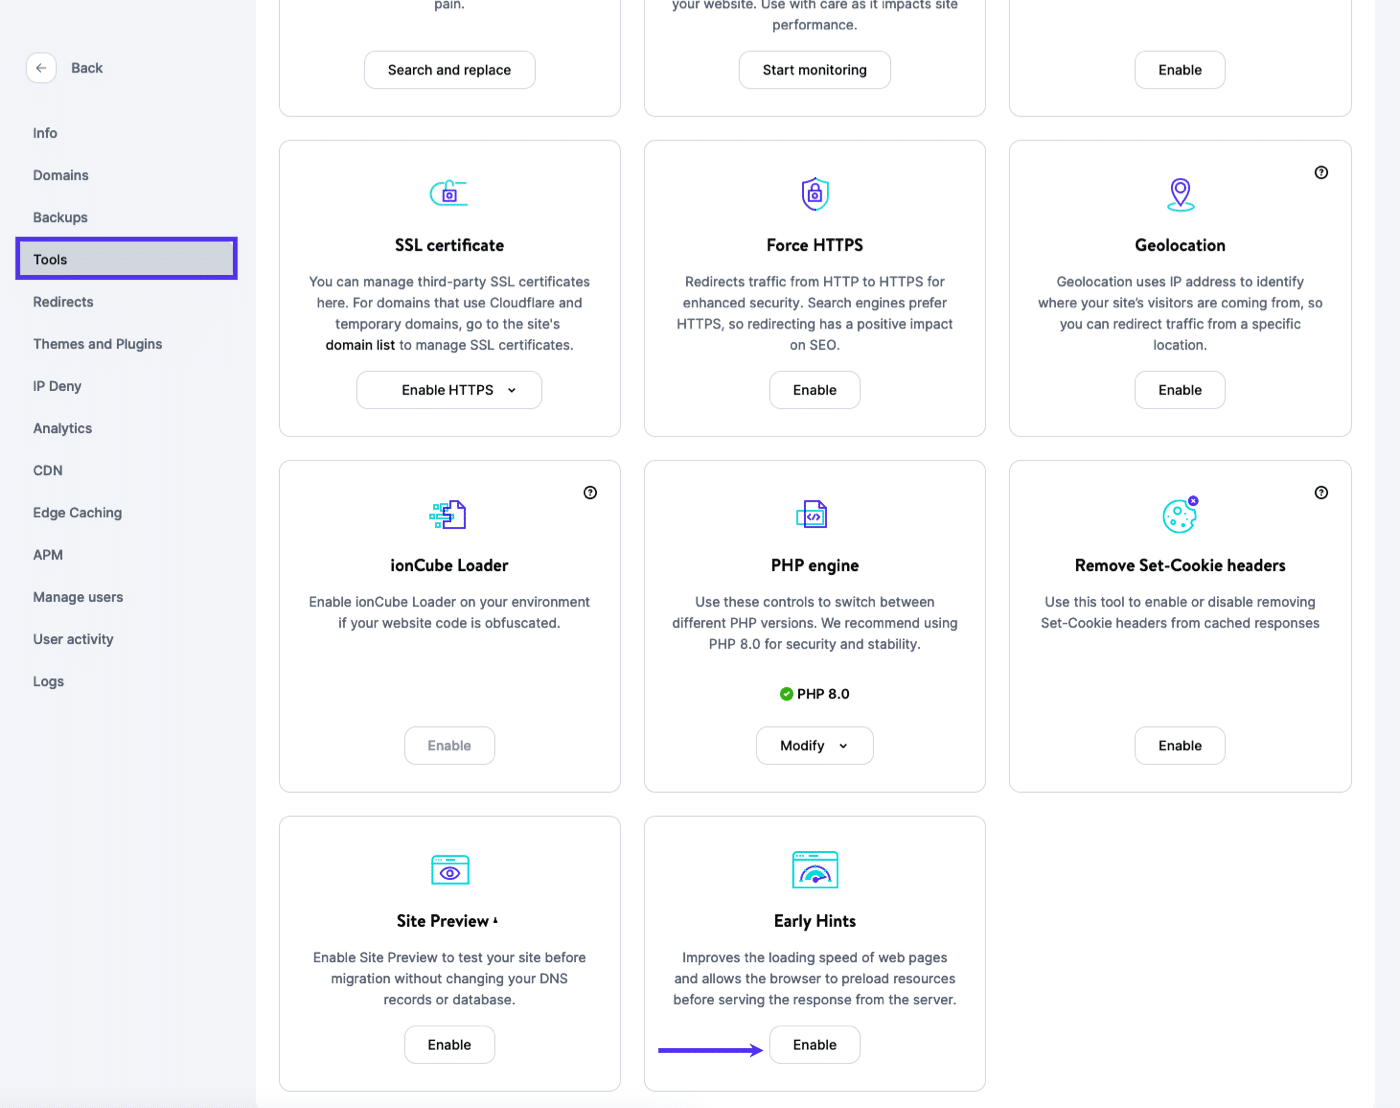 The MyKinsta dashboard with the "Tools" section opened, showing tiles of options with a purple arrow pointing at the "Enable" button under the "Early Hints" tile.